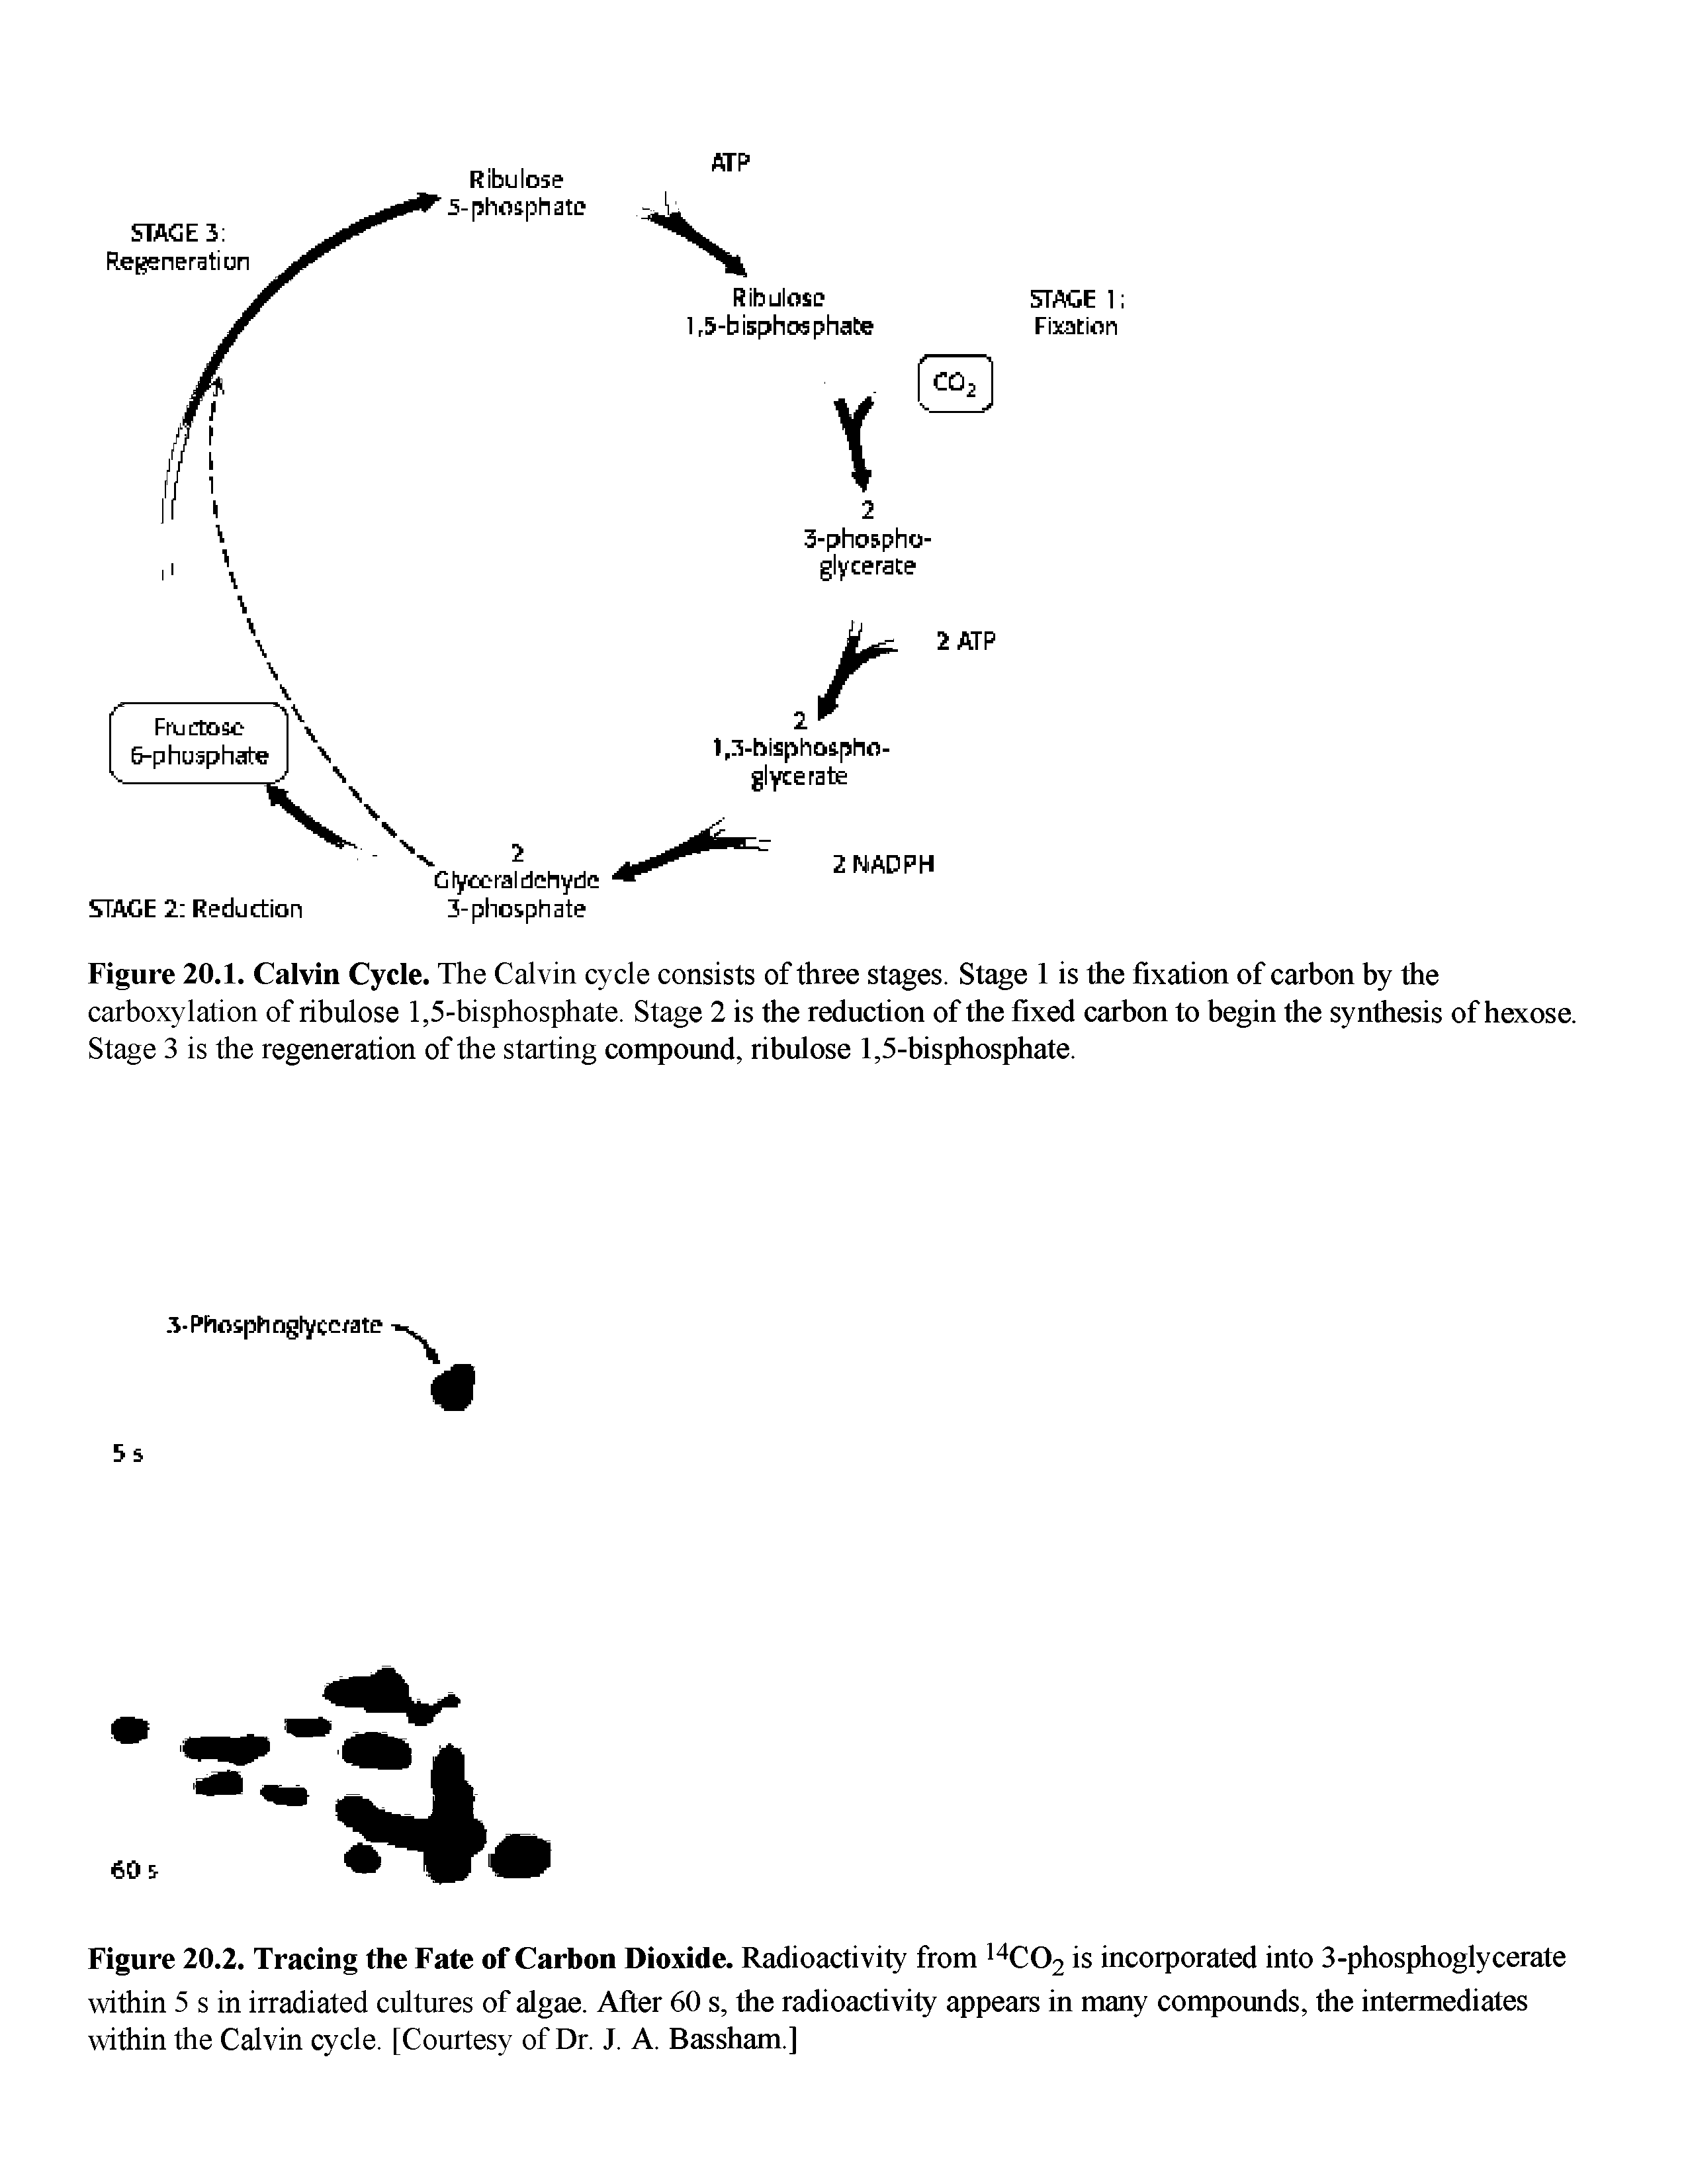 Figure 20.2. Tracing the Fate of Carbon Dioxide. Radioactivity from C02 is incorporated into 3-phosphoglycerate within 5 s in irradiated cultures of algae. After 60 s, the radioactivity appears in many compounds, the intermediates within the Calvin cycle. [Courtesy of Dr. J. A. Bassham.]...